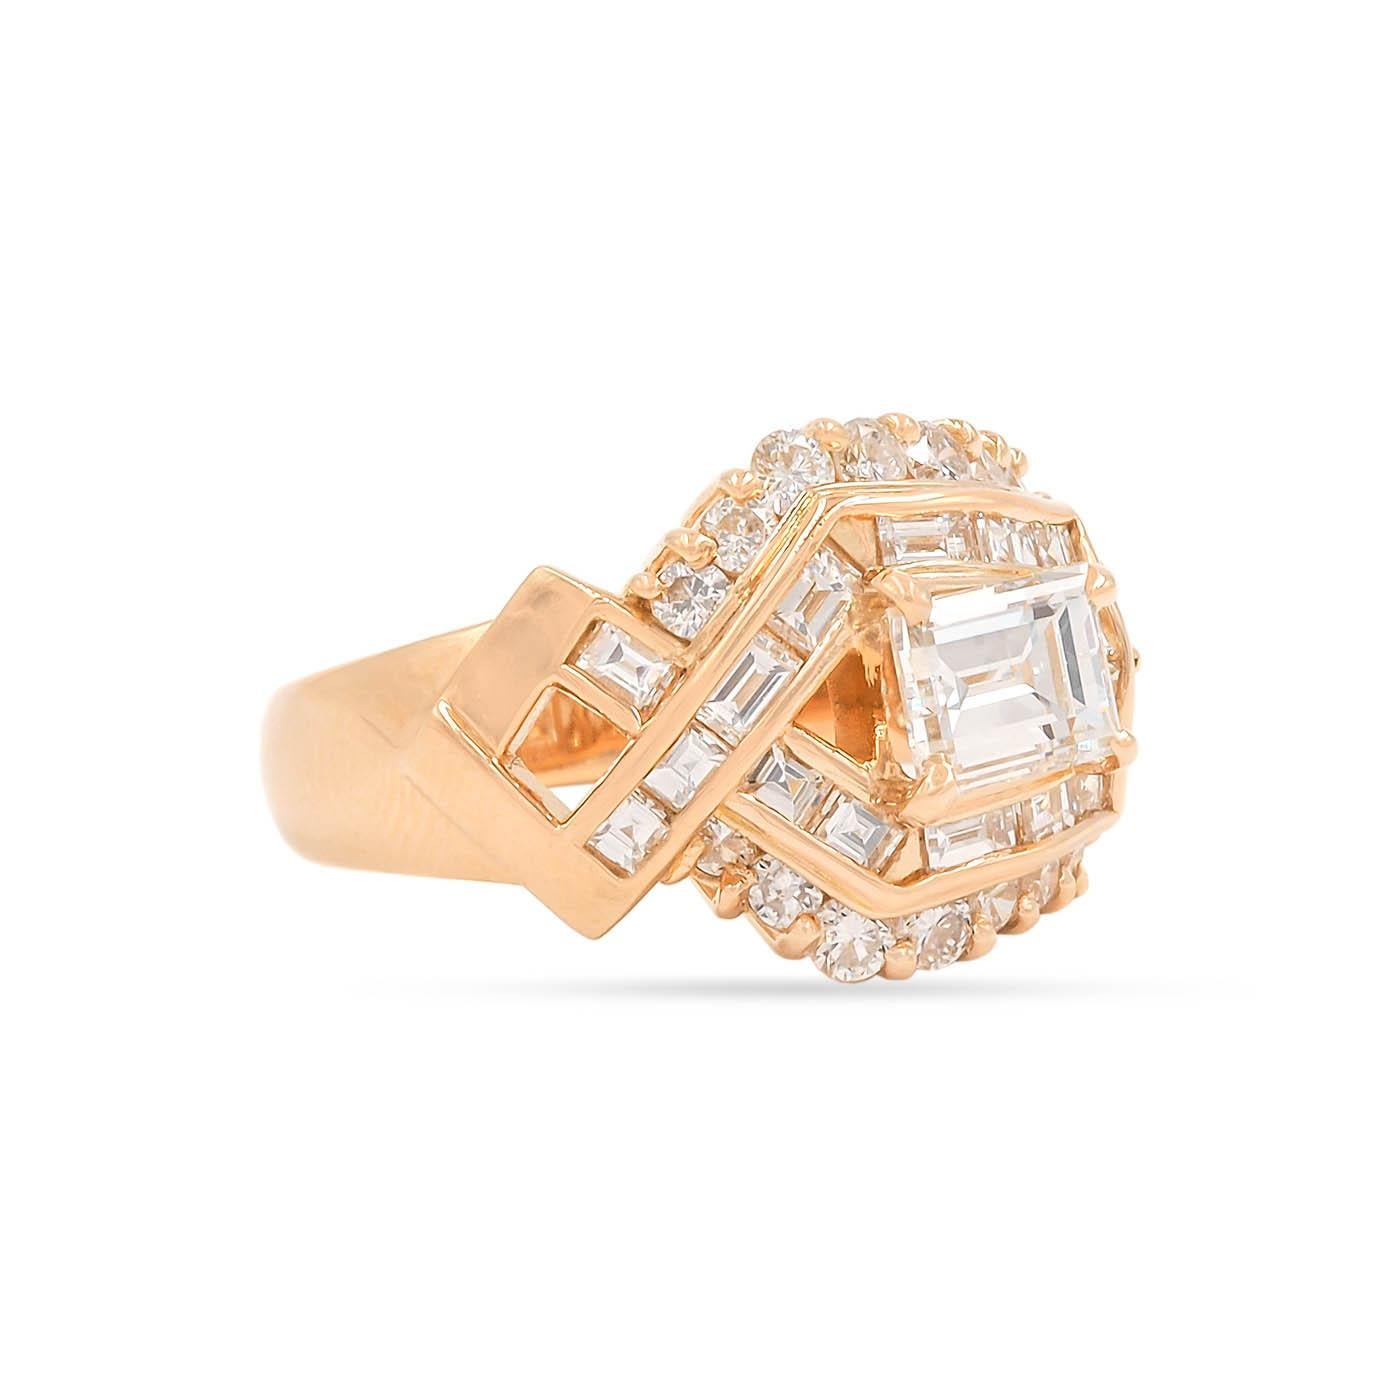 Vintage 1.03 Carat Step Cut Diamond Asymmetrical Cluster Ring composed of 18k yellow gold. With a 1.03 carat Rectangualr Step Cut diamond, GIA certified H color & VS2 clarity. The setting has an asymmetrical styling to it and is further enhanced by